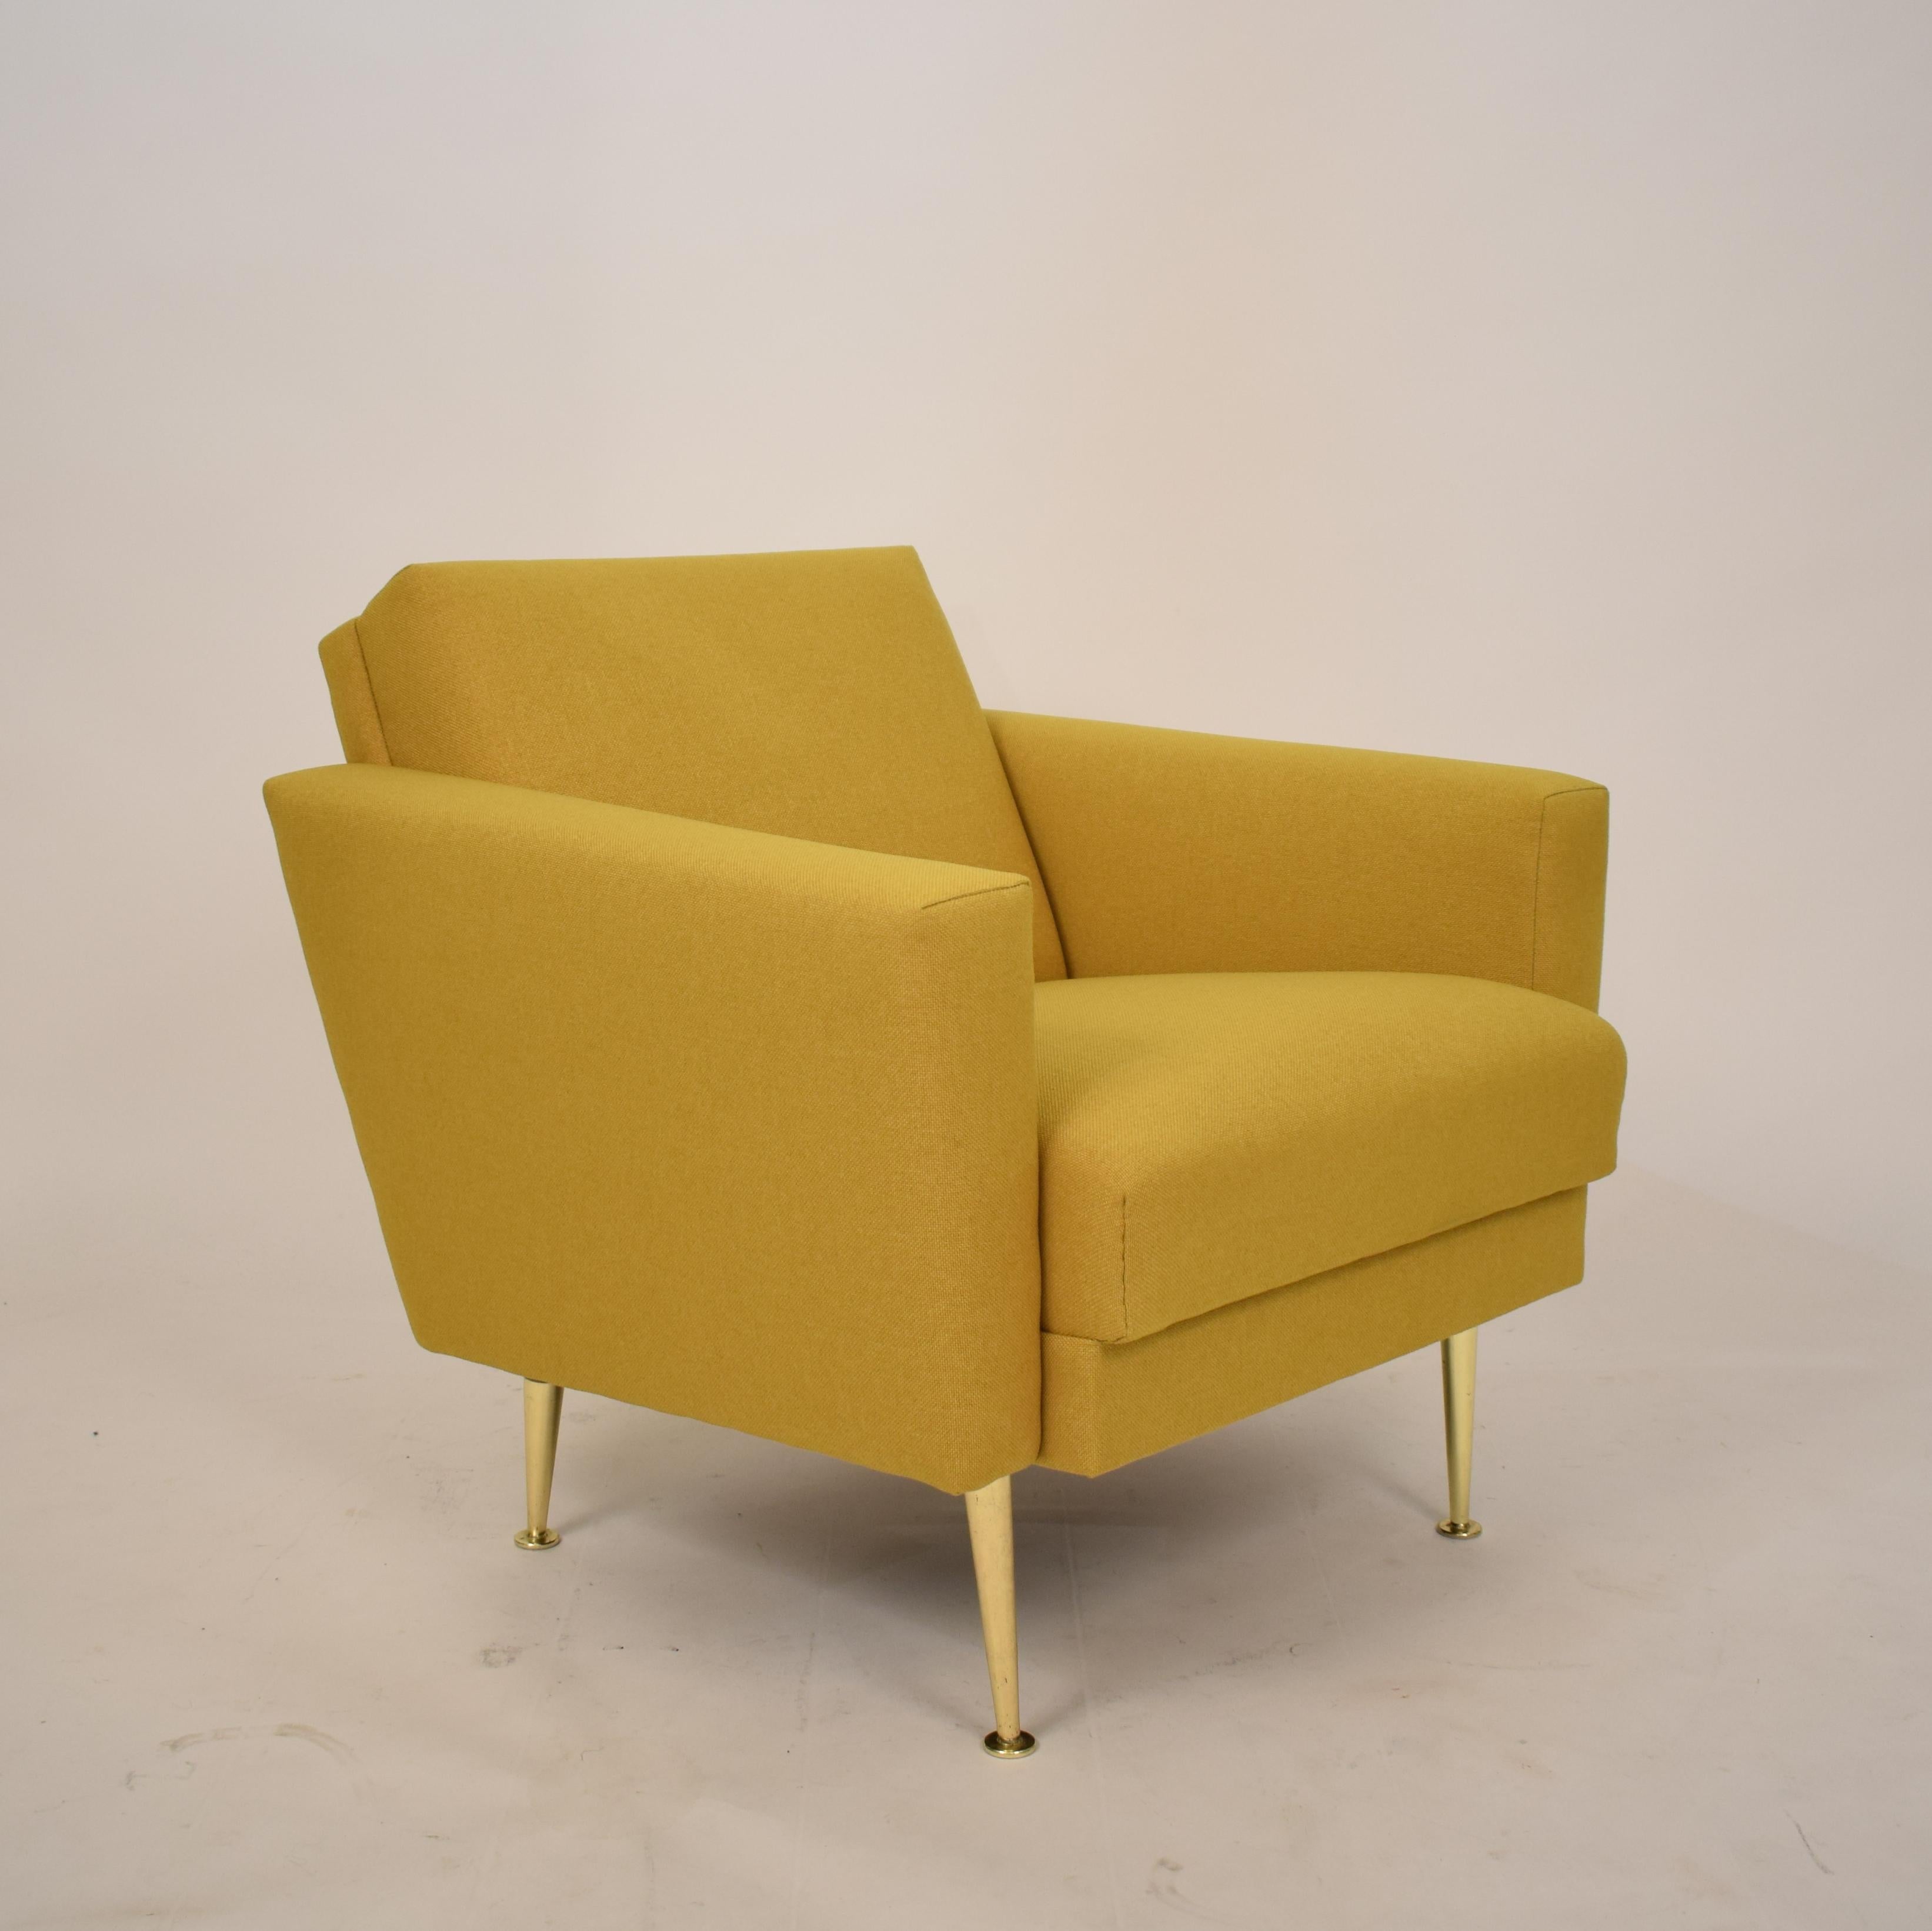 Midcentury German Yellow and Brass Lounge Chair Armchair Pierre Guariche Style 14